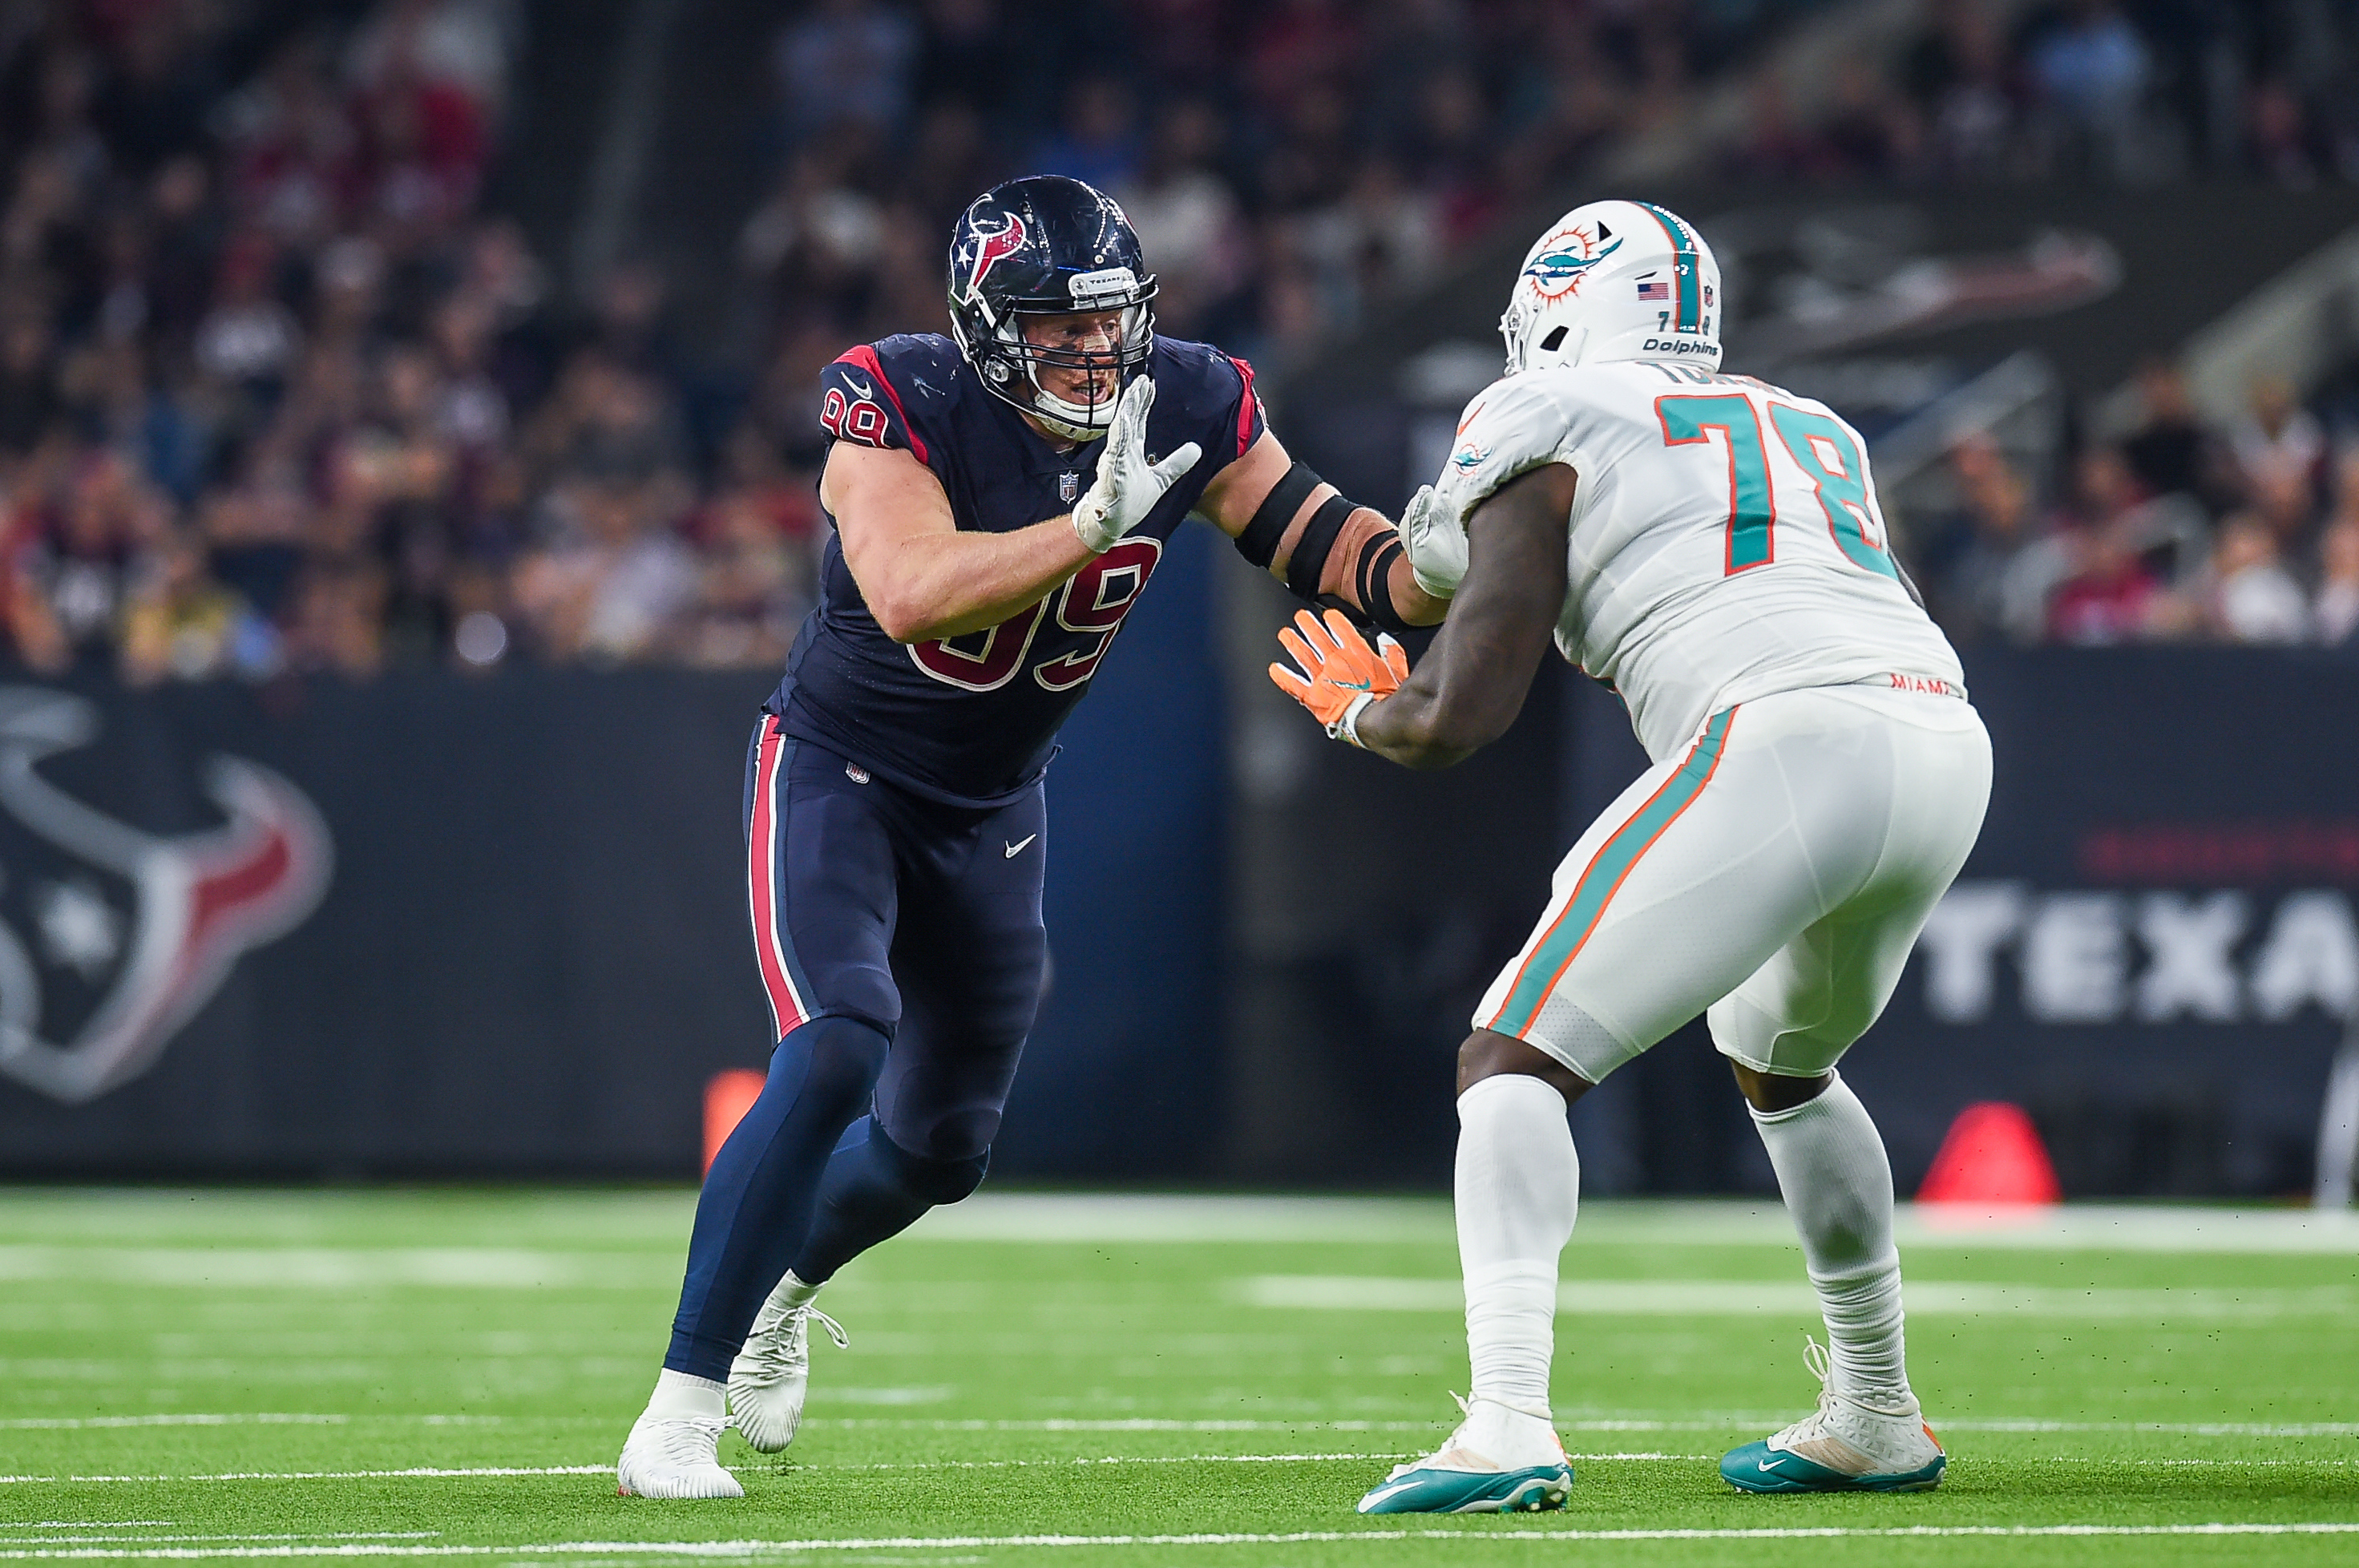 NFL: OCT 25 Dolphins at Texans